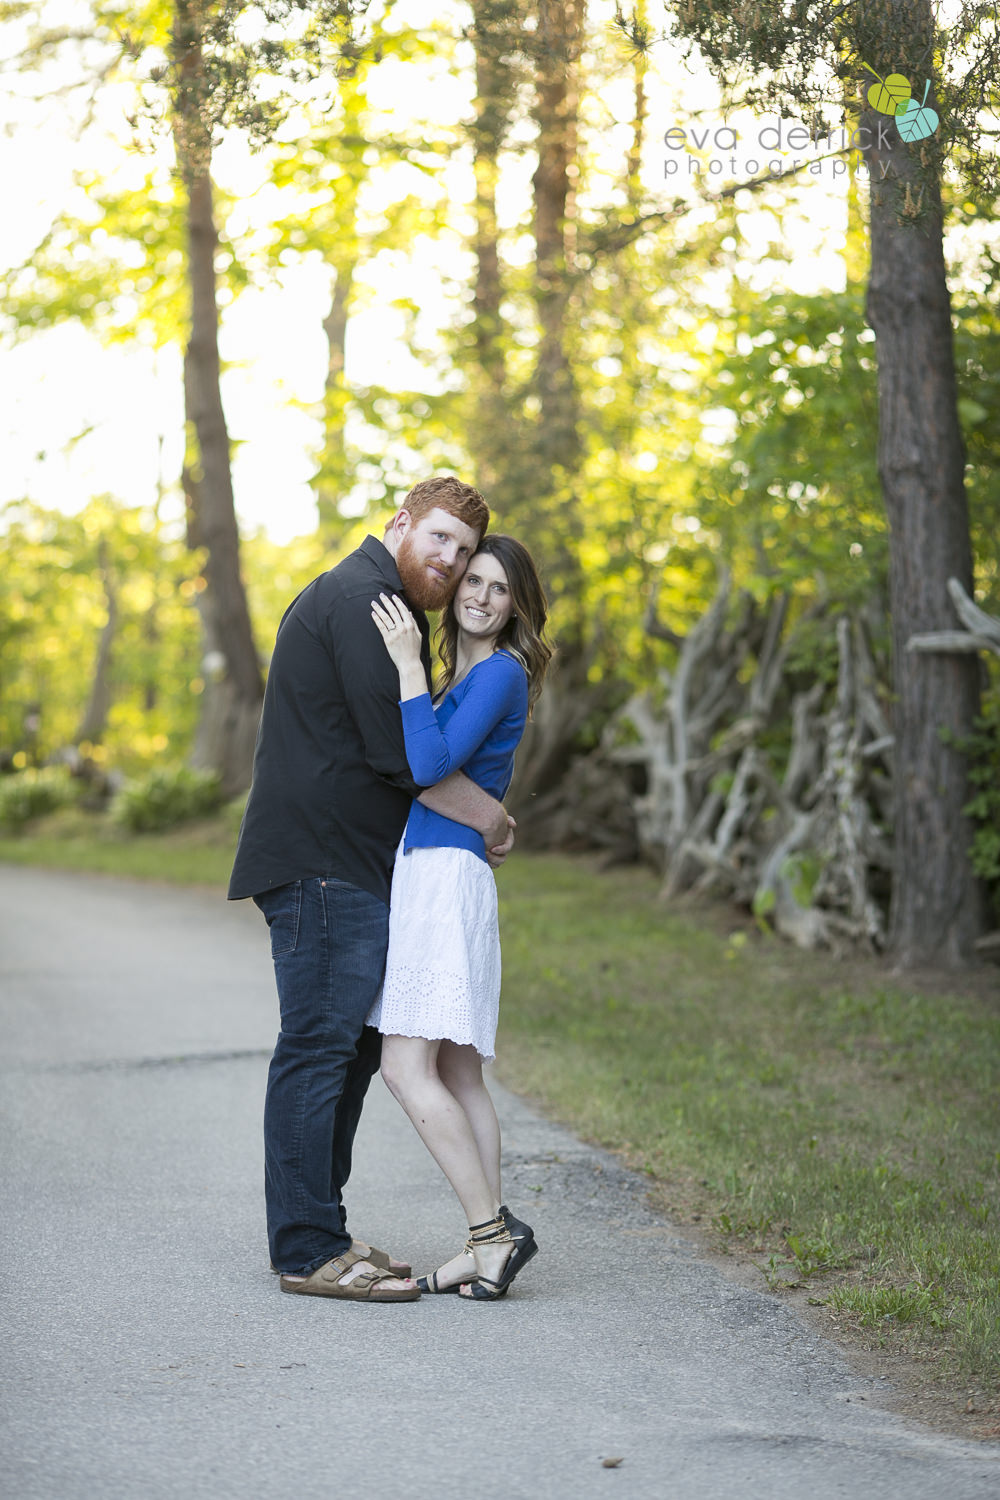 Millgrove-Photographer-Millgrove-Engagement-Session-photography-by-Eva-Derrick-Photography-009.JPG